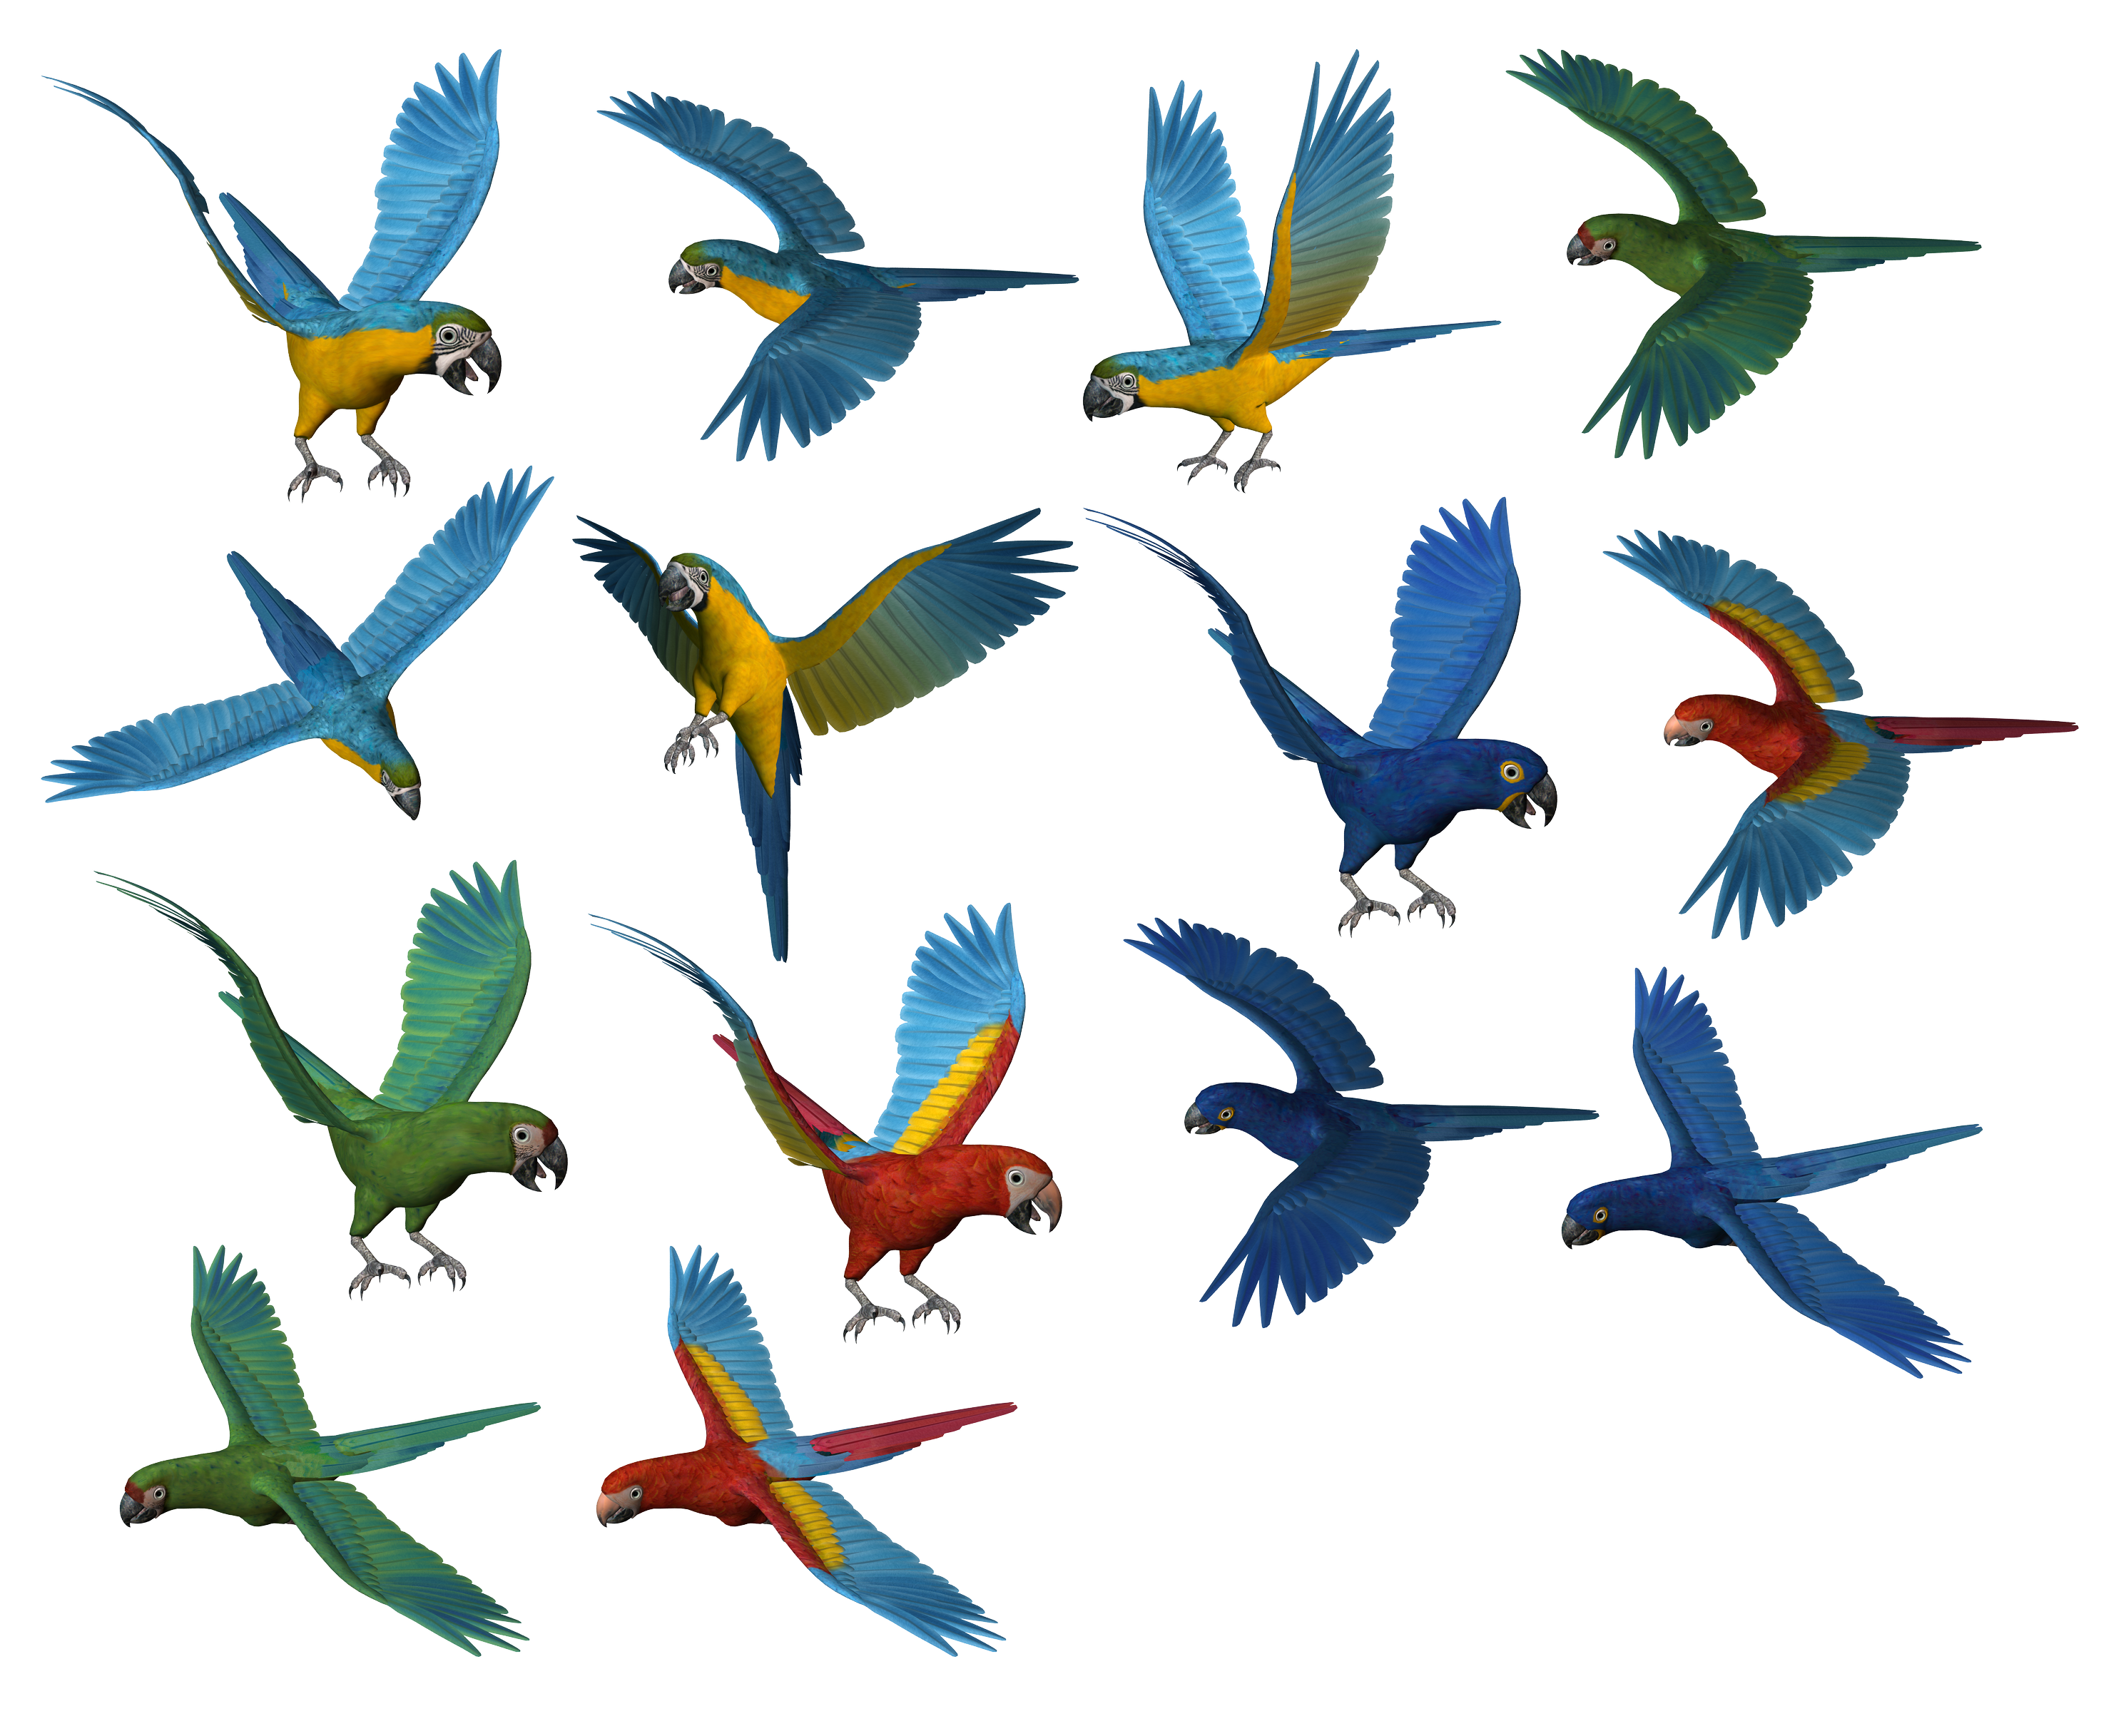 Parrot PNG images, free download